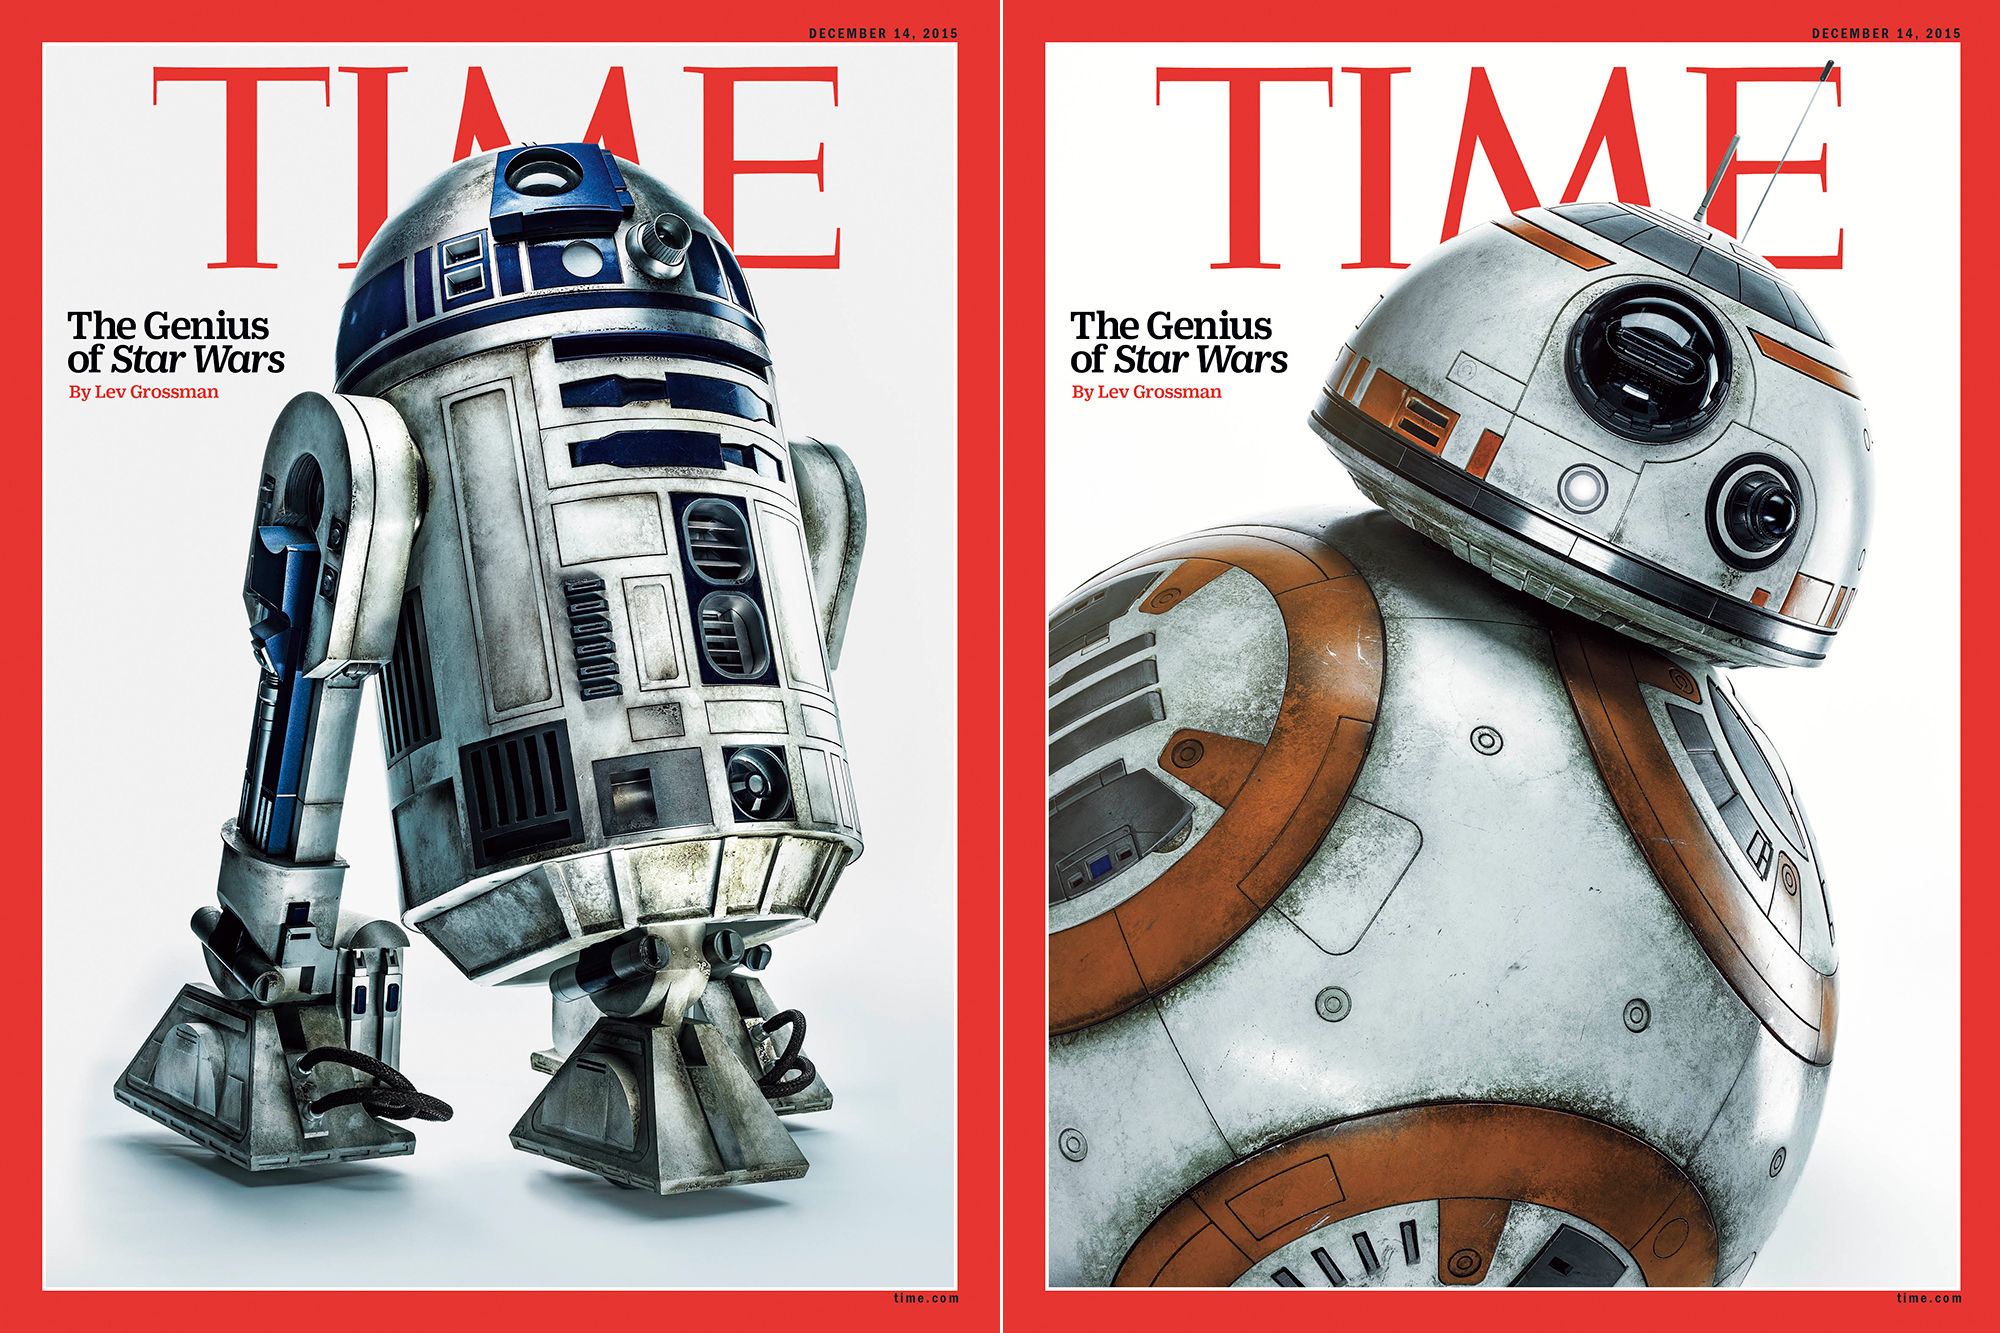 Star Wars The Force Awakens Time Cover Behind Scenes